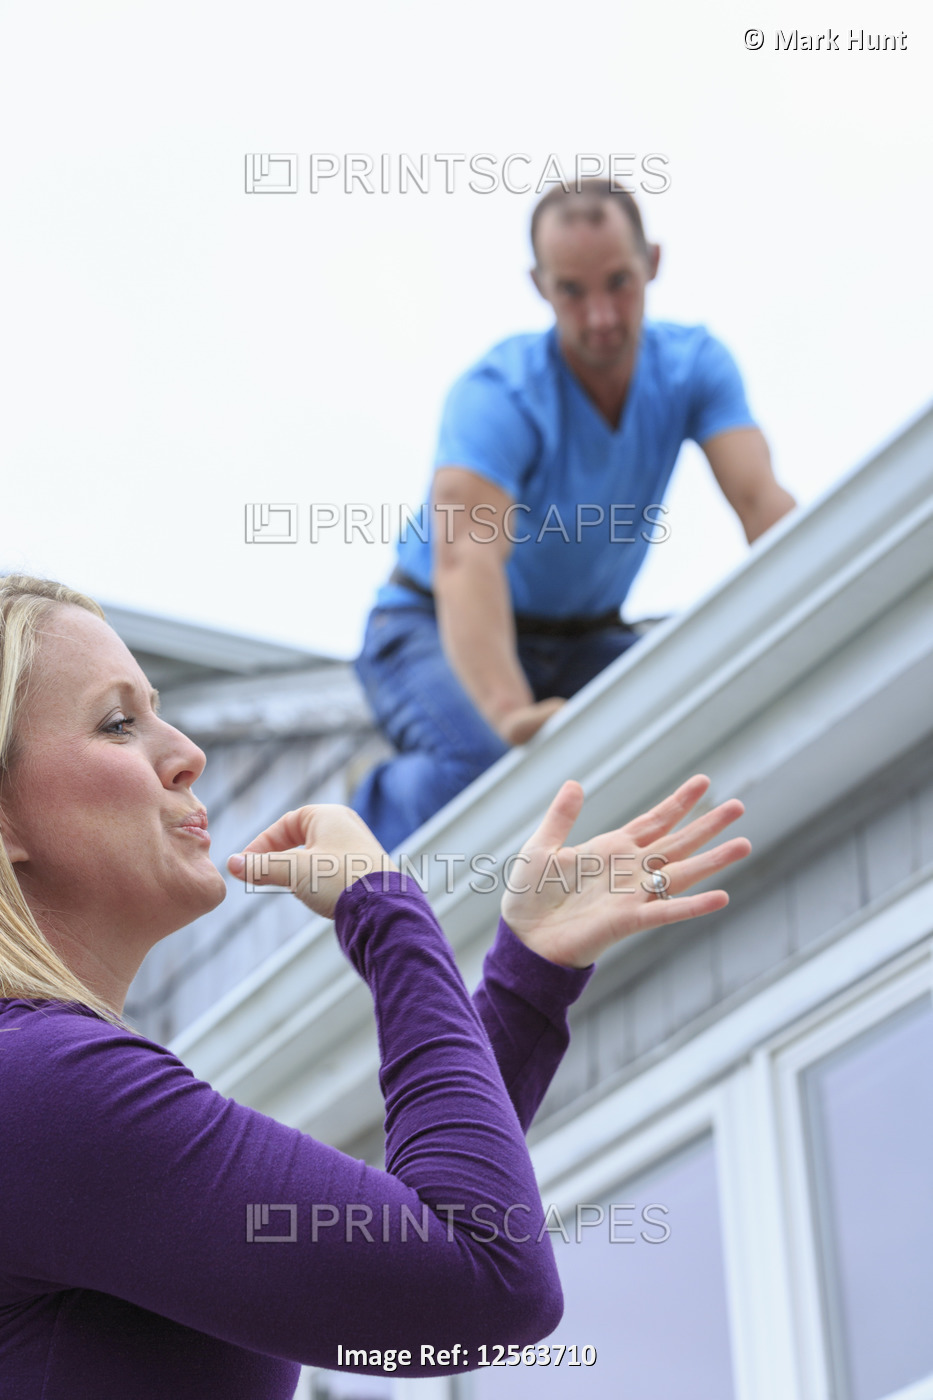 Homeowner and roofer communicating in American Sign Language about 'Soon'